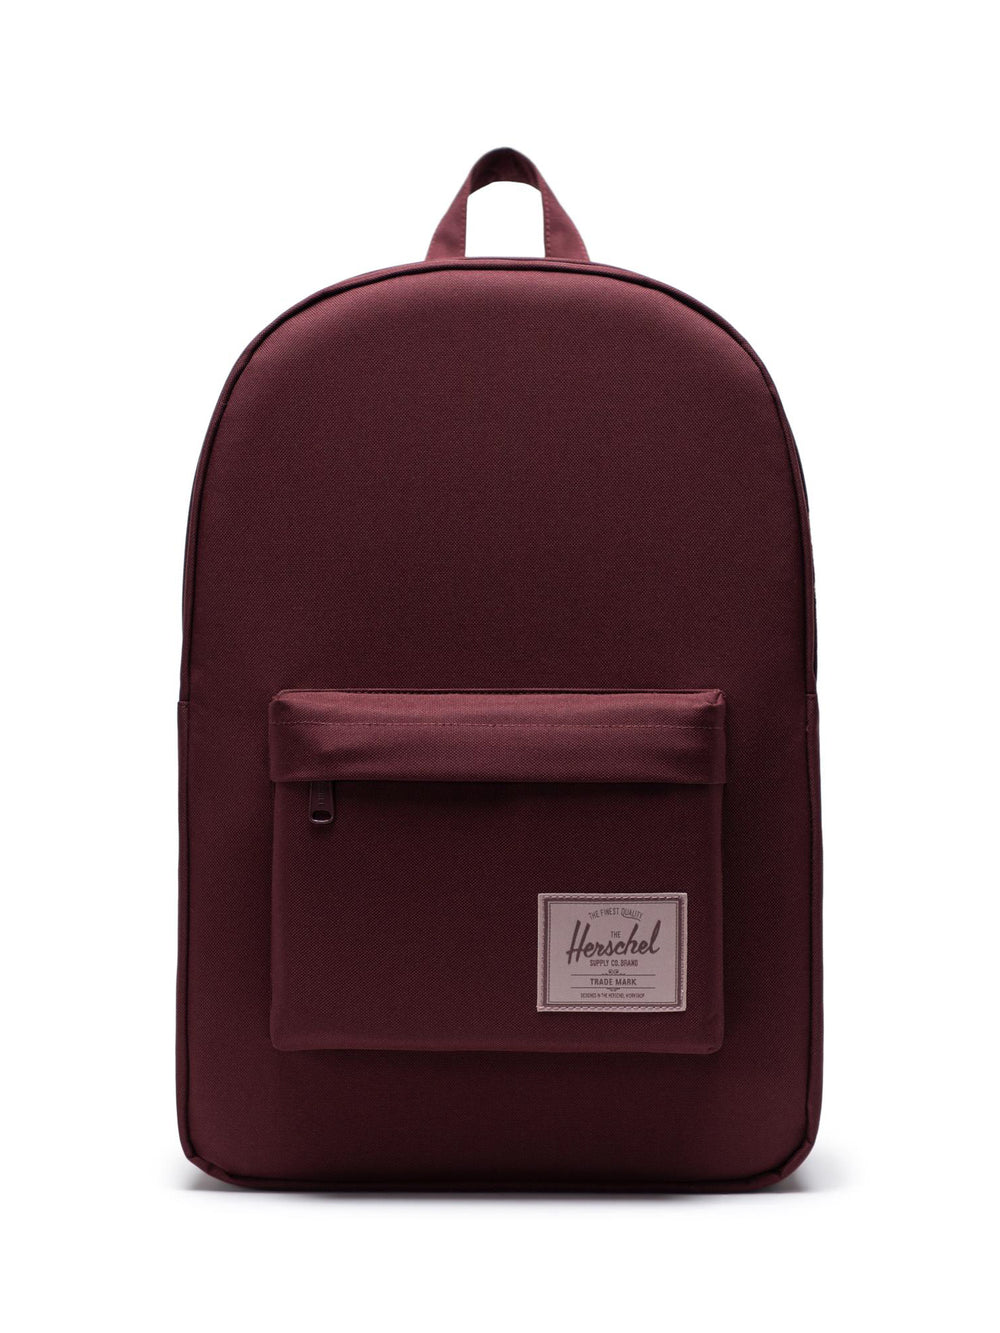 HERSCHEL SUPPLY CO. MIDWAY 25L BACKPACK - PLUM/ASH ROS - CLEARANCE